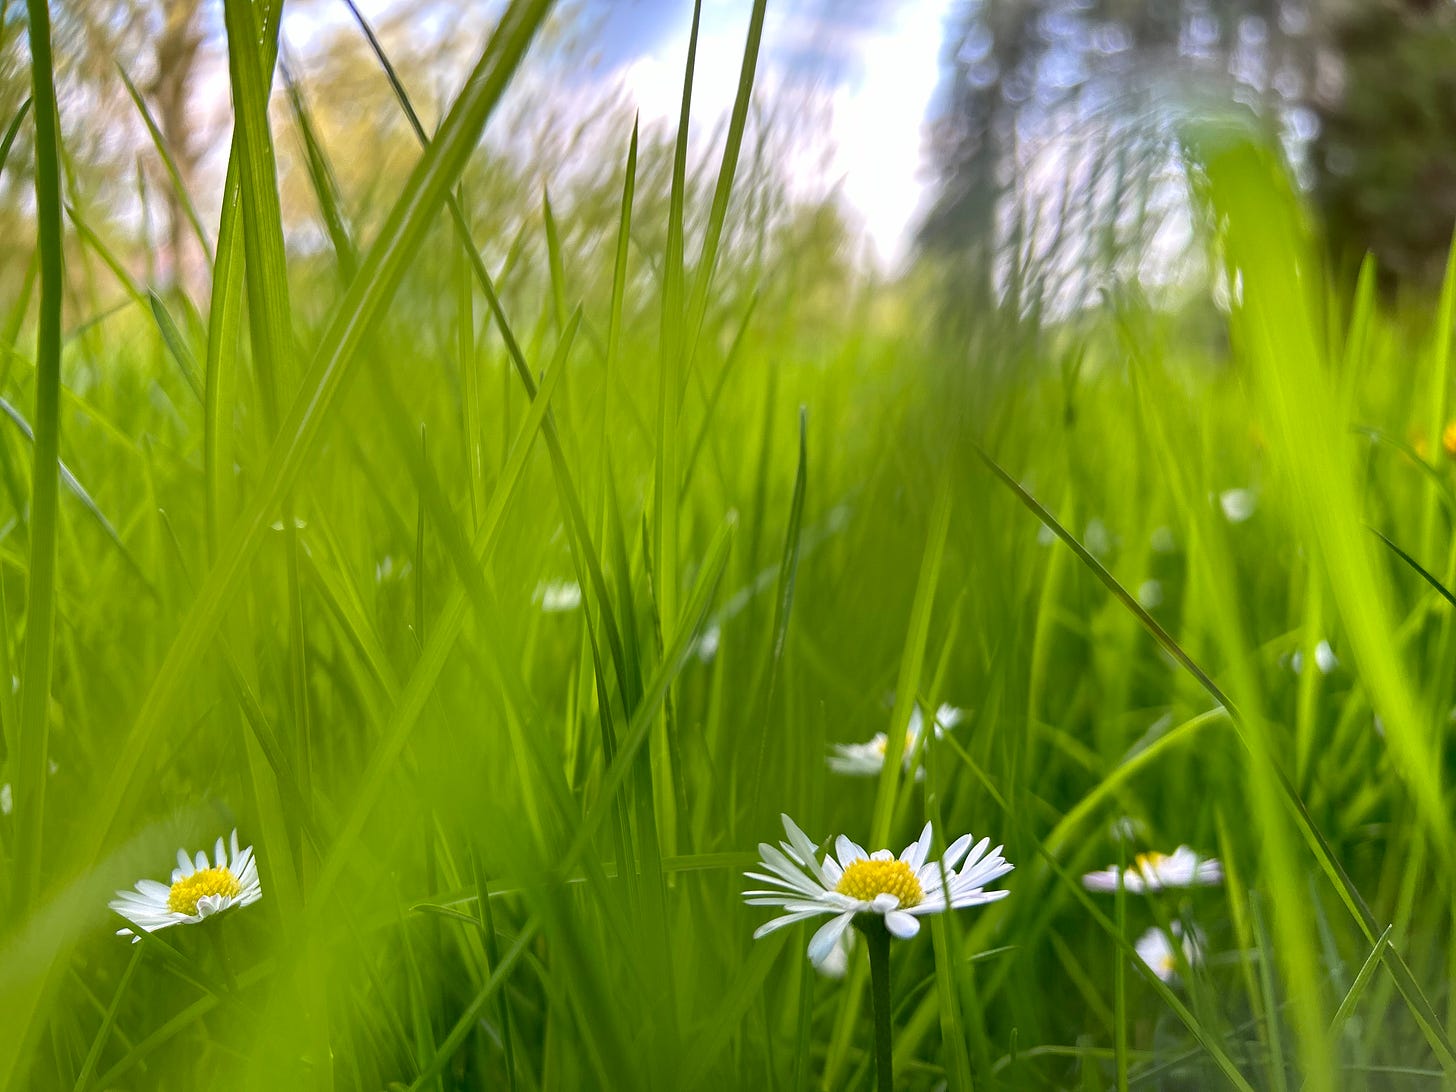 White lawn daisies beneath long blades of grasp and just a touch of sky in the background.